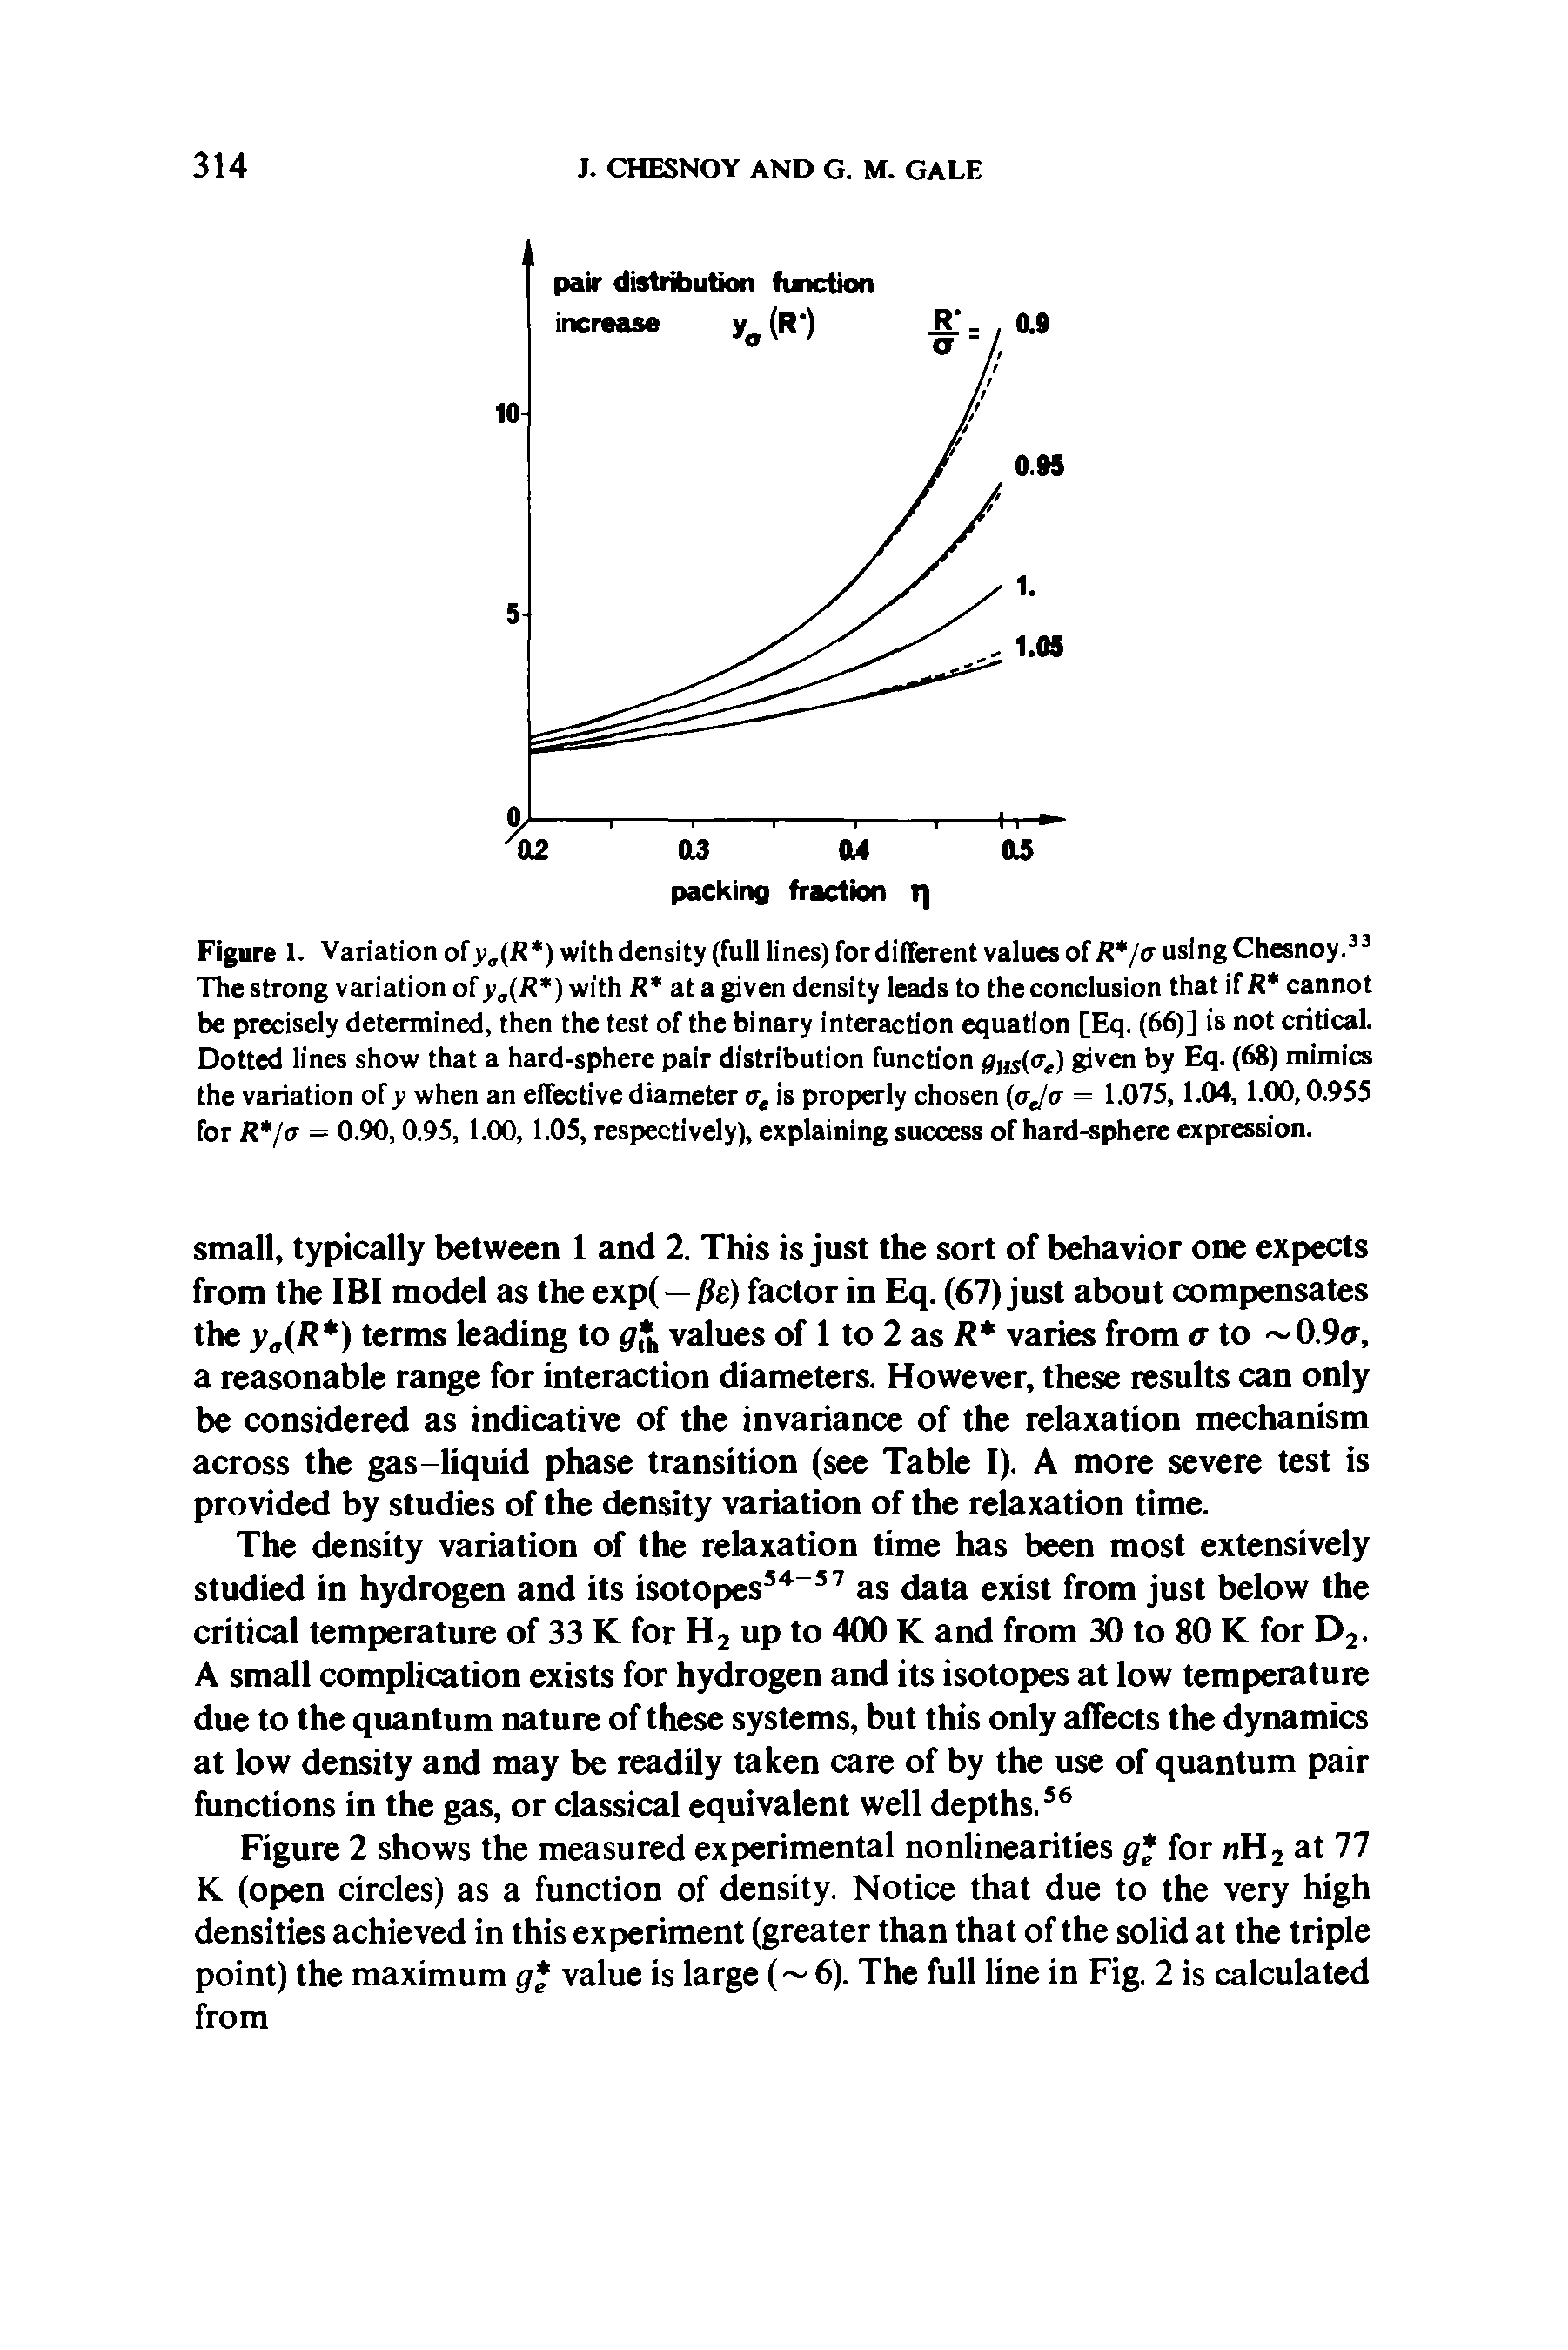 Figure 1. Variation of with density (full lines) fordilTerent values of R a using Chesnoy. The strong variation ofy (i ) with R at a given density leads to the conclusion that ifcannot be precisely determined, then the test of the binary interaction equation [Eq. (66)] is not critical. Dotted lines show that a hard-sphere pair distribution function fi(us(<r<,) given by Eq. (68) mimics the variation of y when an effective diameter a, is properly chosen (aja = 1.075,1.04,1.00,0.955 for R a = 0.90,0.95, 1.00, 1.05, respectively), explaining success of hard-sphere expression.